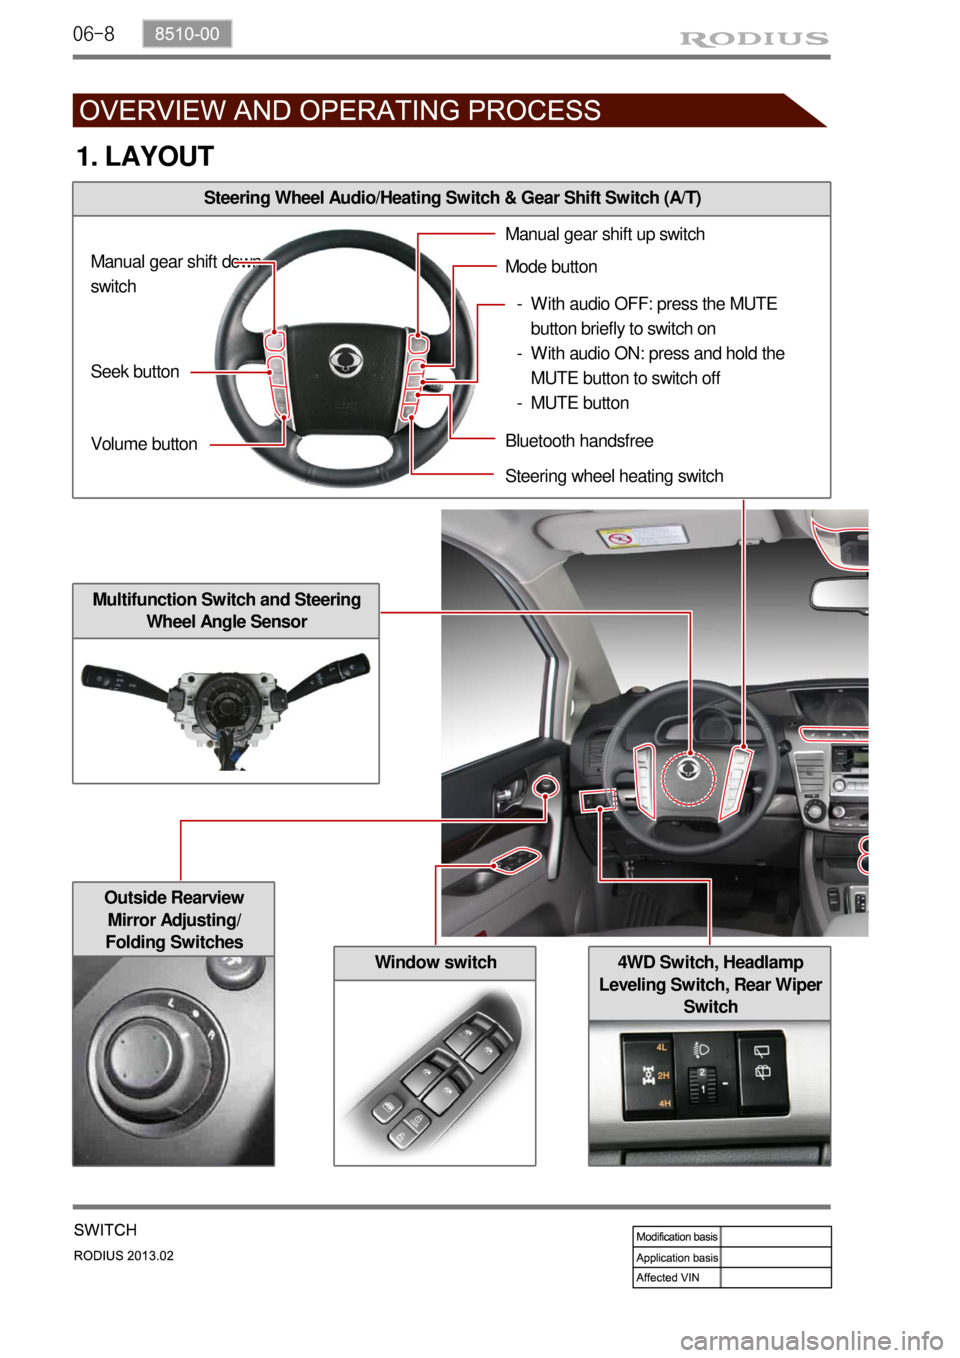 SSANGYONG TURISMO 2013  Service Manual 06-8
Outside Rearview 
Mirror Adjusting/ 
Folding Switches
Window switch
Steering Wheel Audio/Heating Switch & Gear Shift Switch (A/T)
Multifunction Switch and Steering 
Wheel Angle Sensor
4WD Switch,